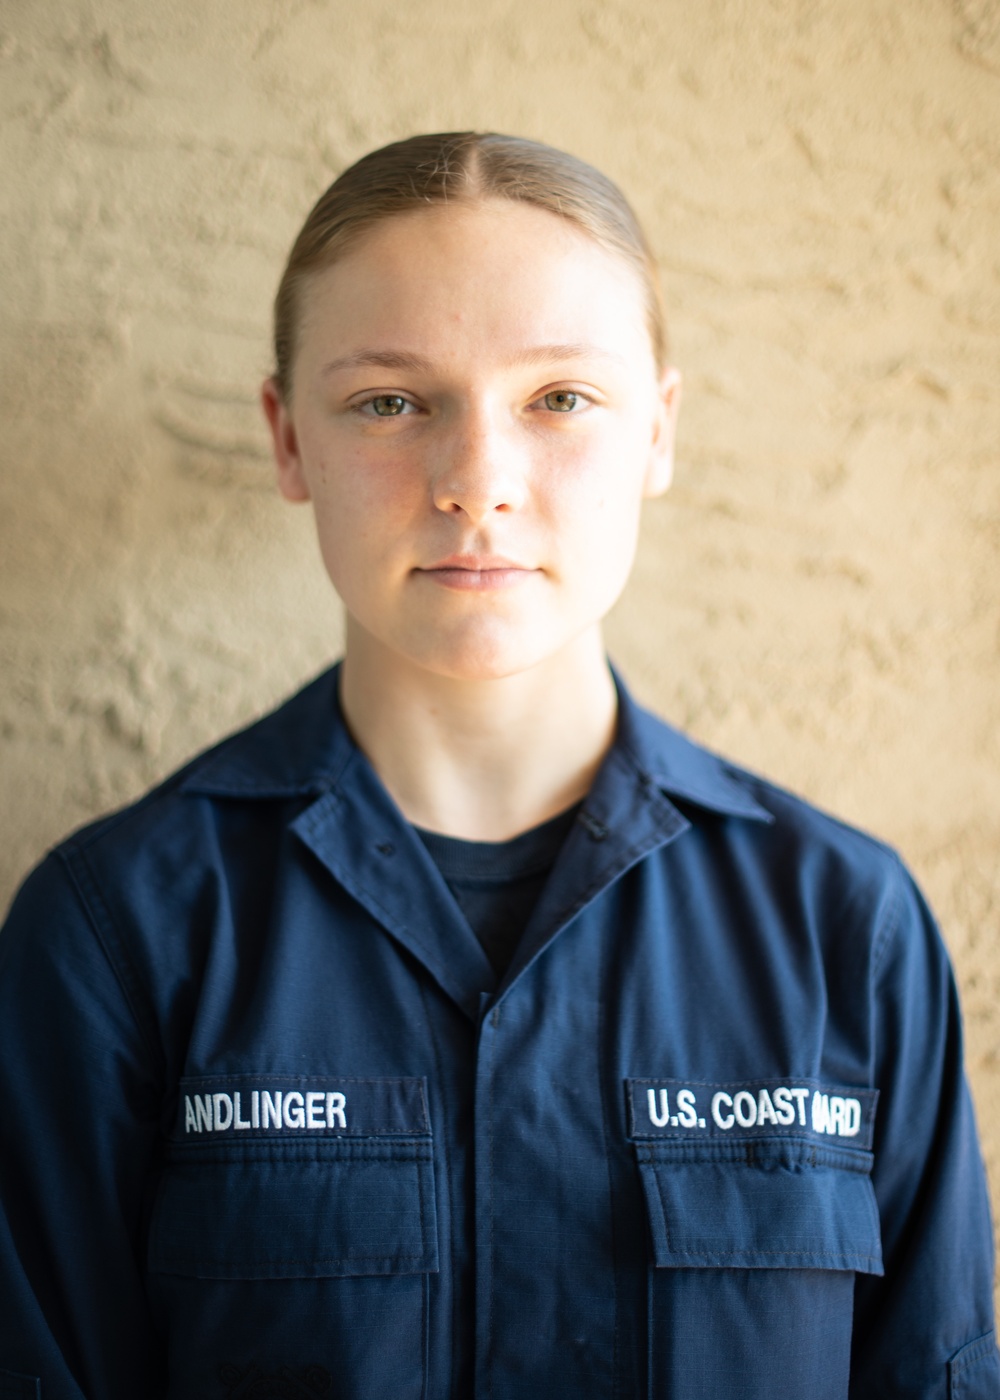 Coast Guard Recognizes High-Performing Female Recruits in Boot Camp